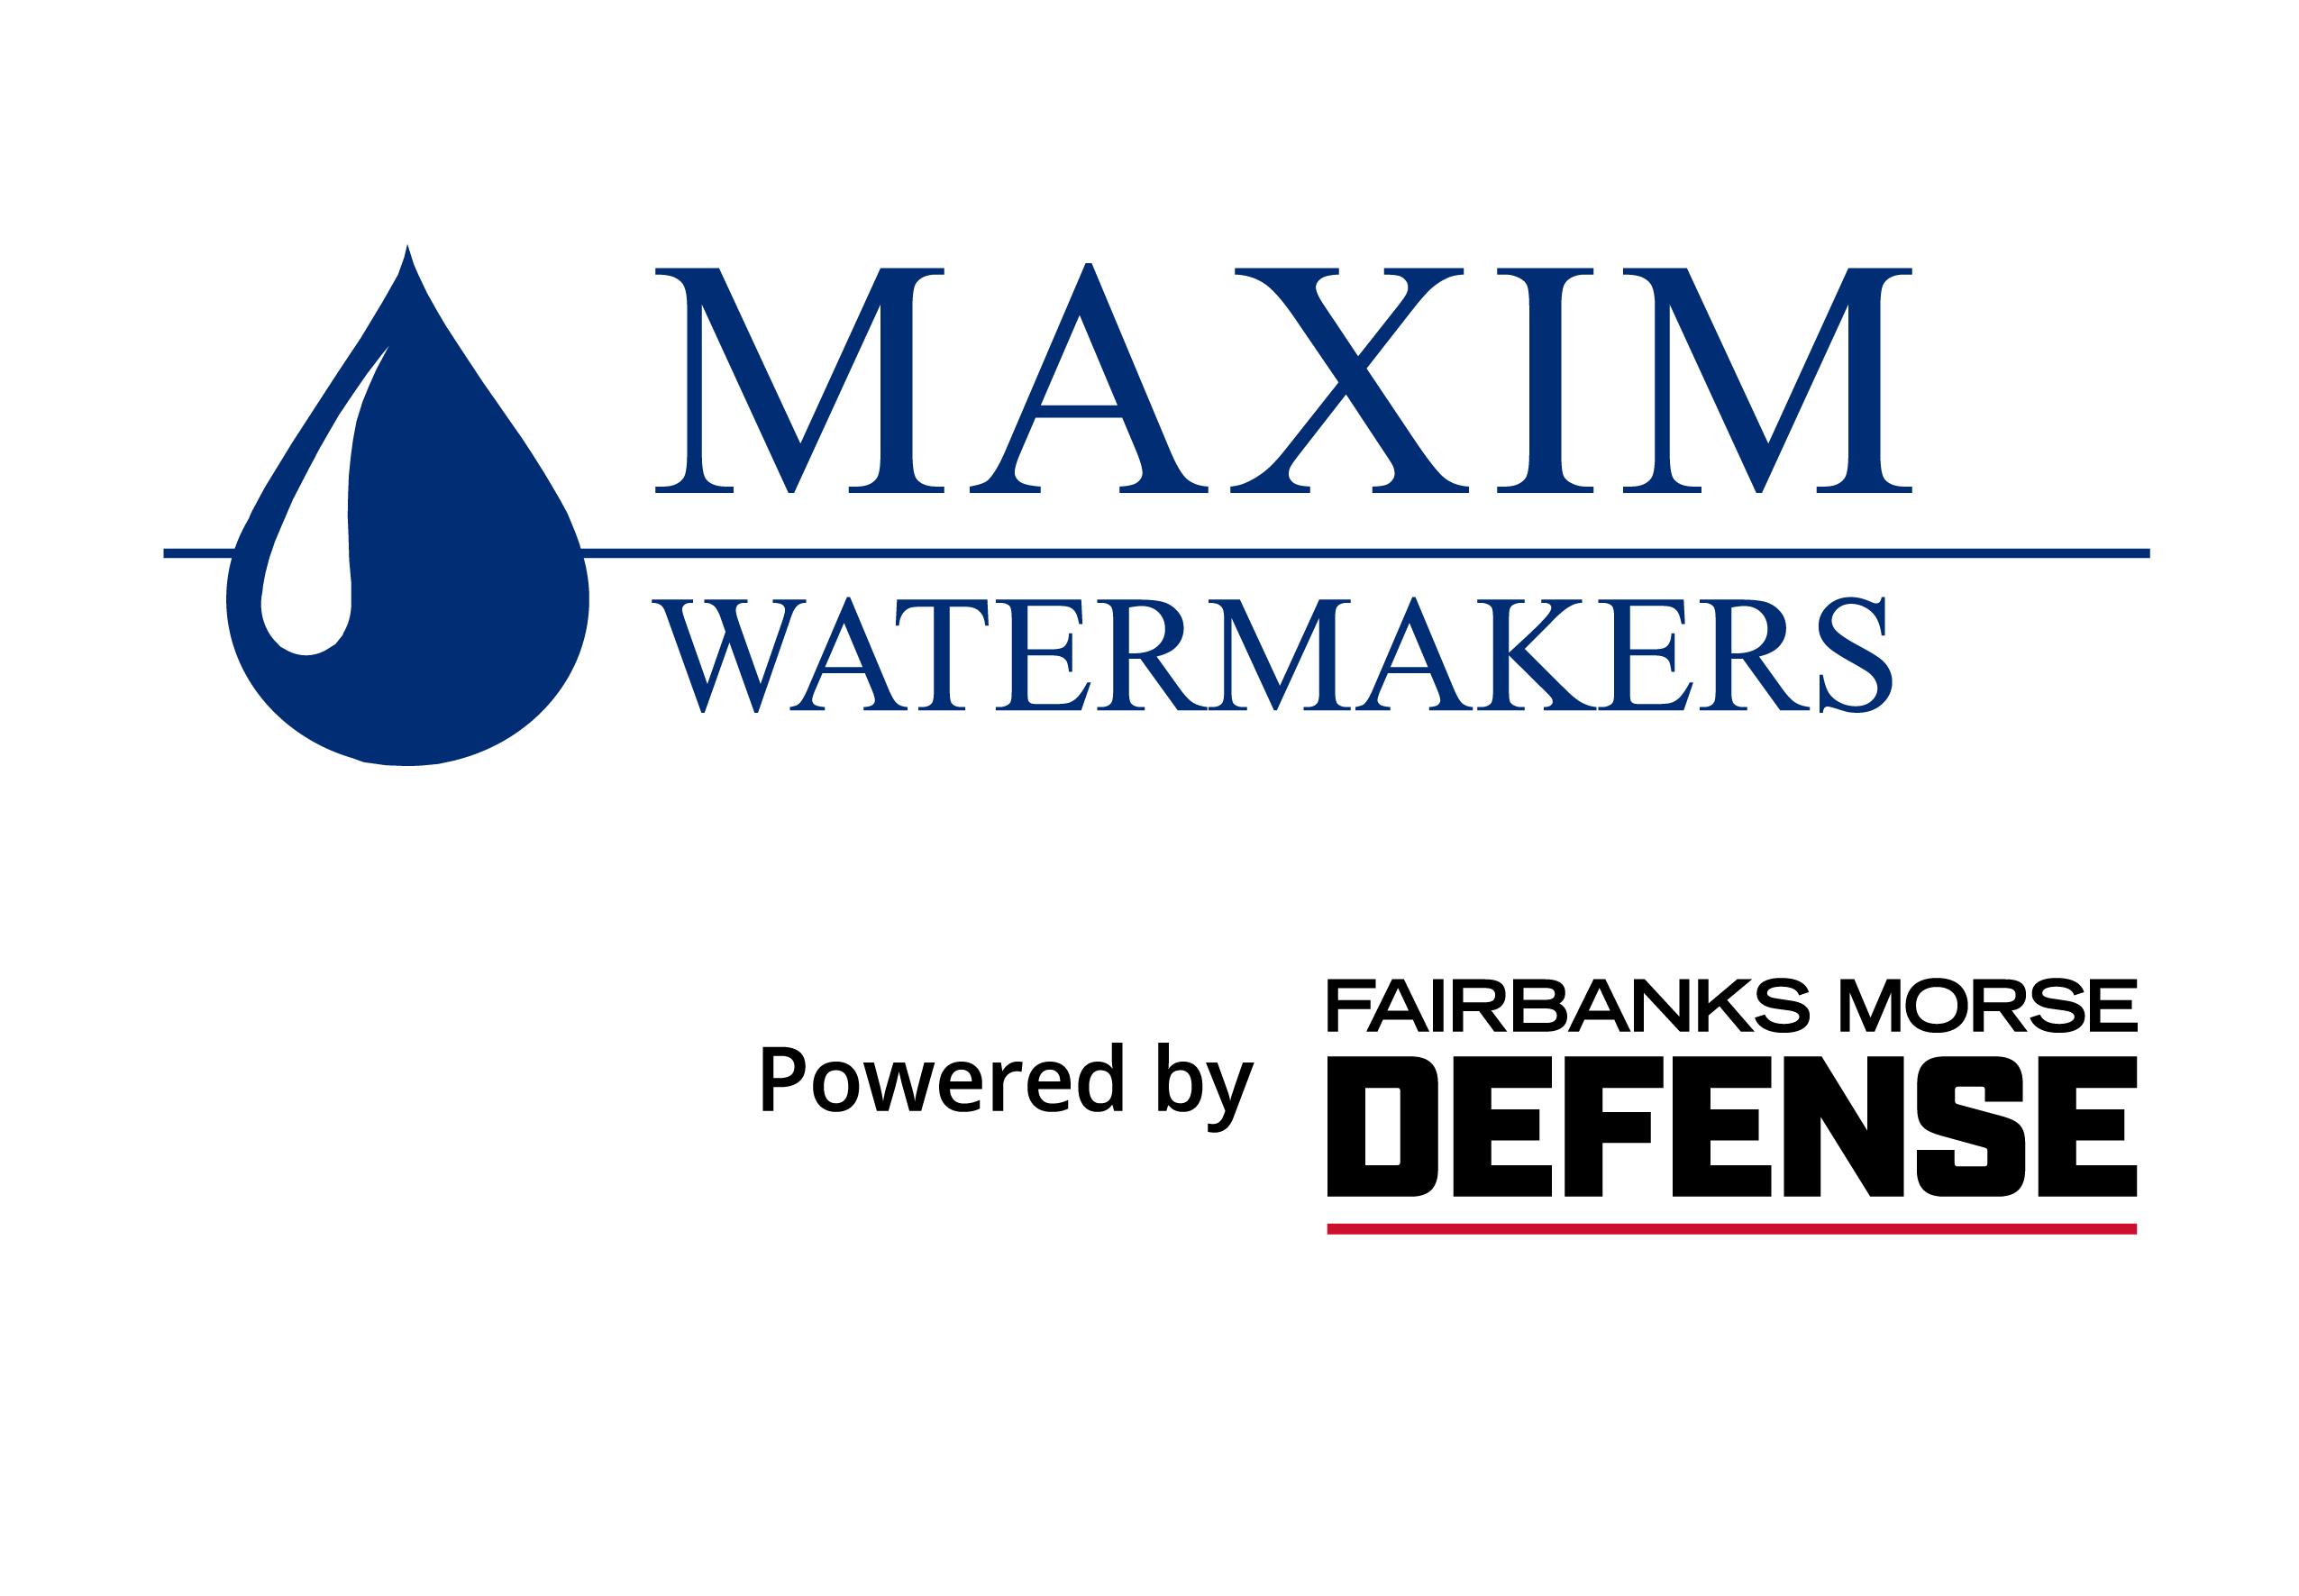 https://fame-usa.com/wp-content/uploads/2022/08/Maxim-Watermakers-FMD-LOGOS-RGB-2C-002.png